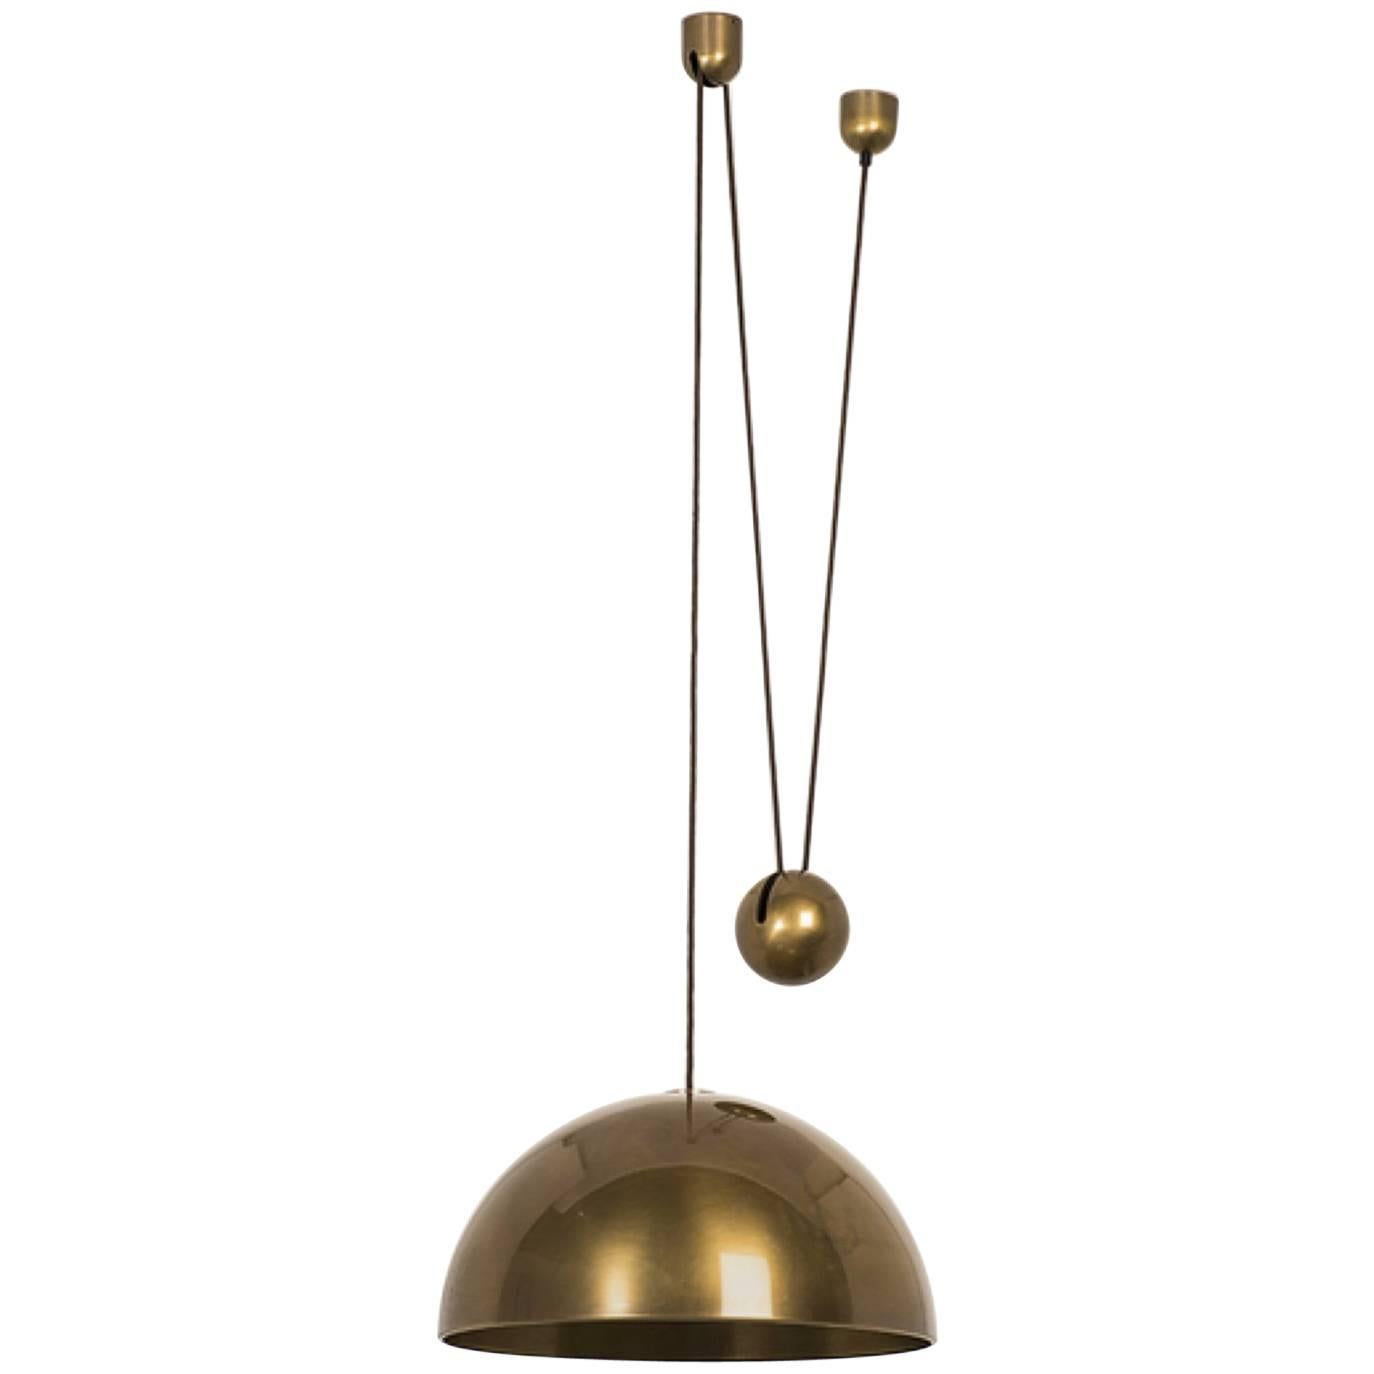 Rare Florian Schulz Solan Counterweight Lamp, Germany, 1982 in Brass